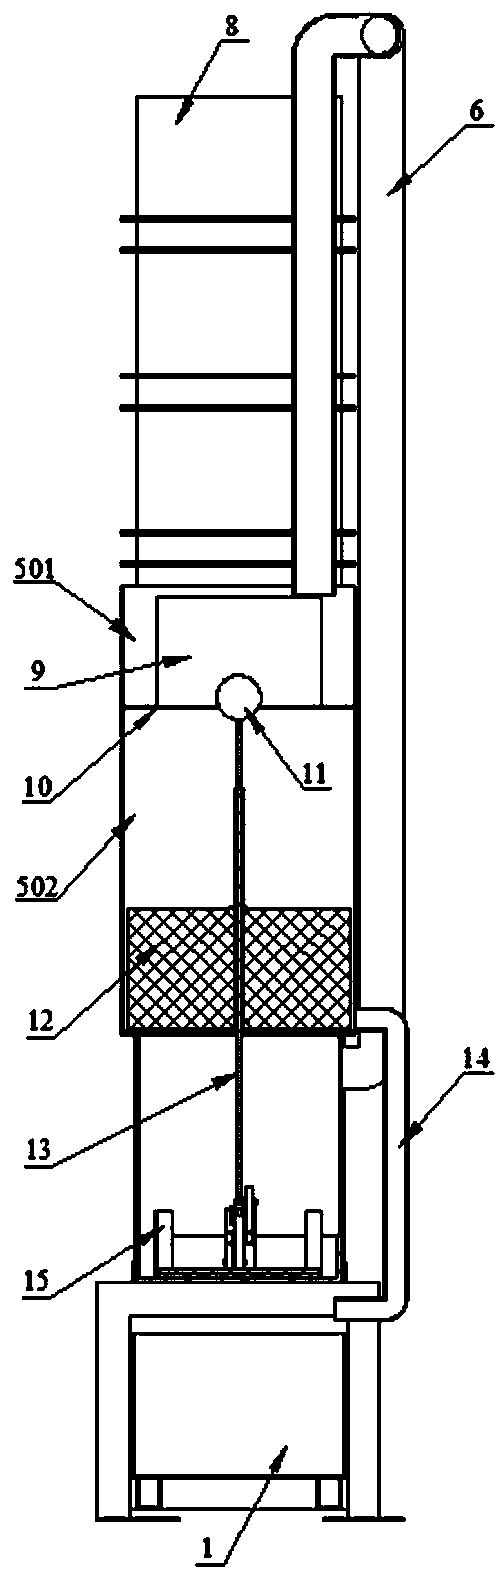 Device for efficiently removing impurities from sewage